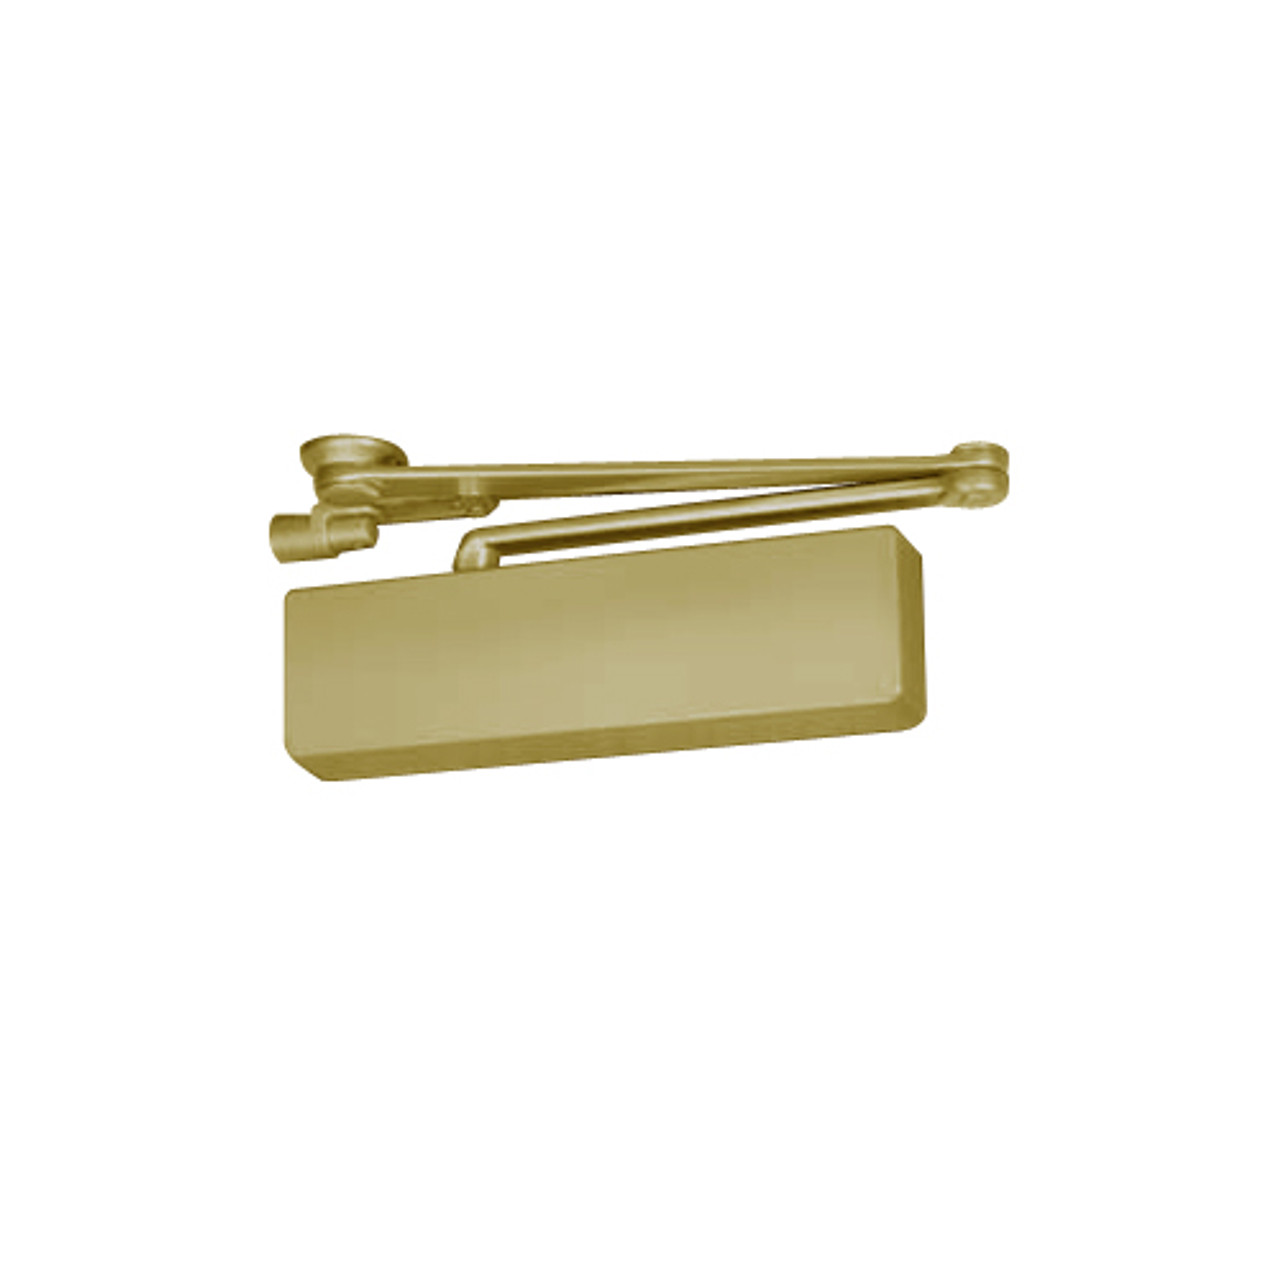 CPS7500-696 Norton 7500 Series Non-Hold Open Institutional Door Closer with CloserPlus Spring Arm in Gold Finish